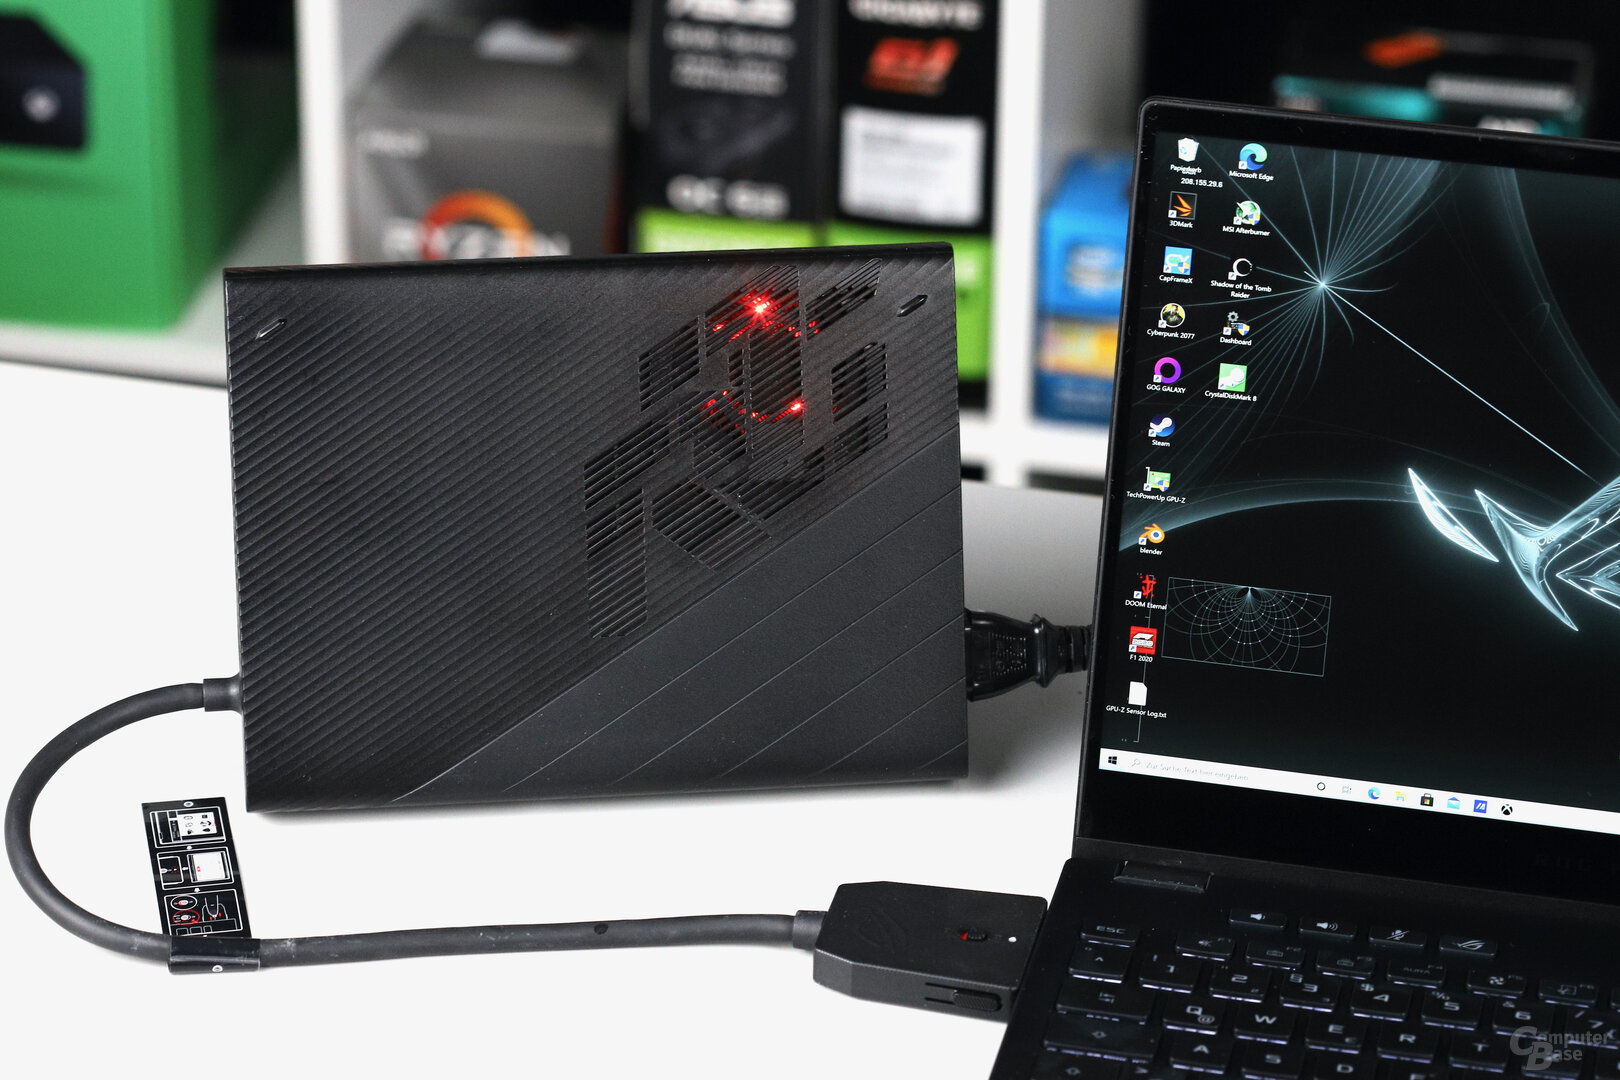 The external ROG XG Mobile contains a GeForce RTX 3080 laptop GPU with 150 watts